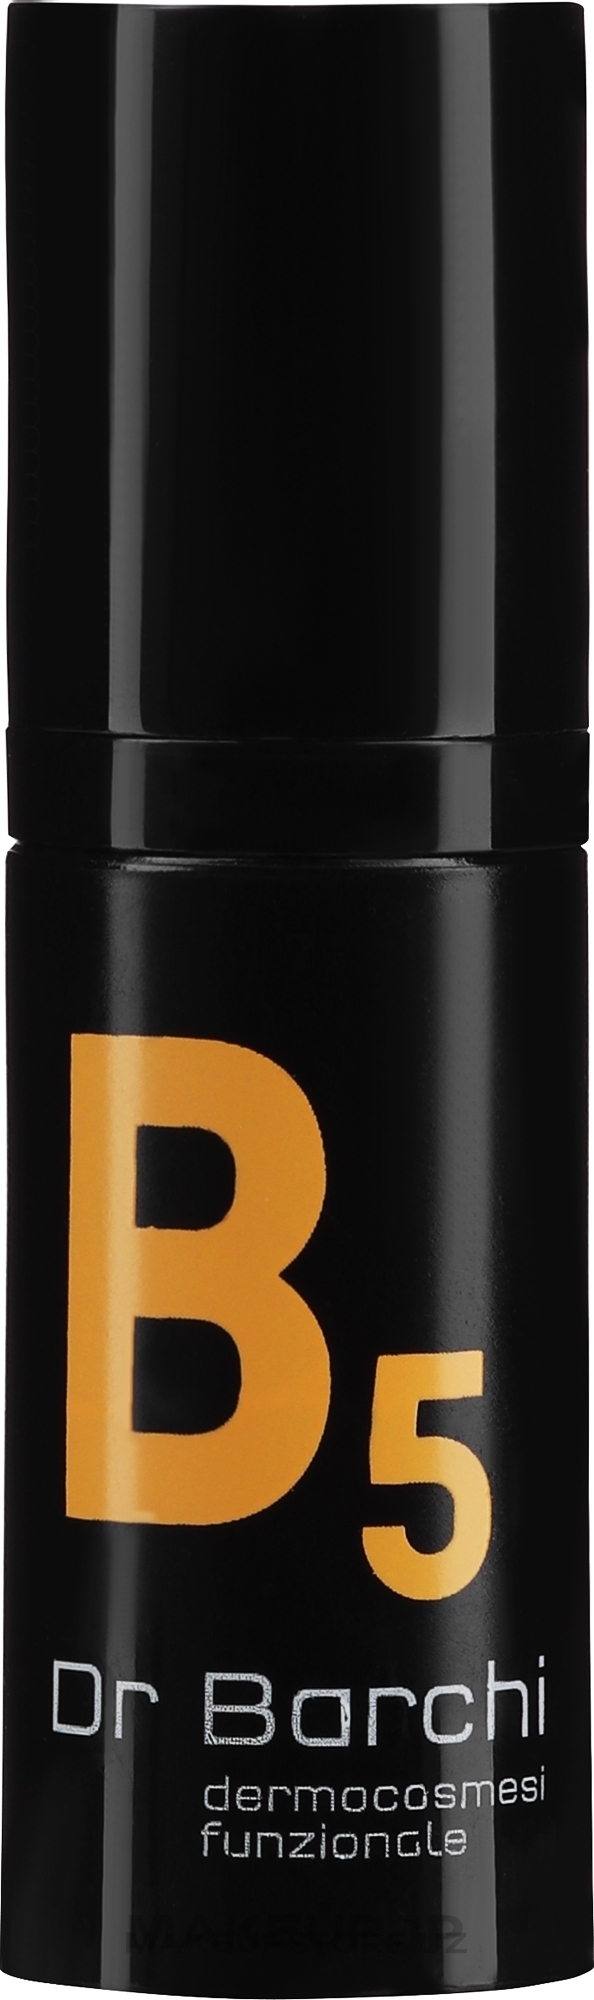 Vitamin Face Concentrate - Dr. Barchi Cozyme Skin B5 (Vitamin Concentrate) — photo 10 ml